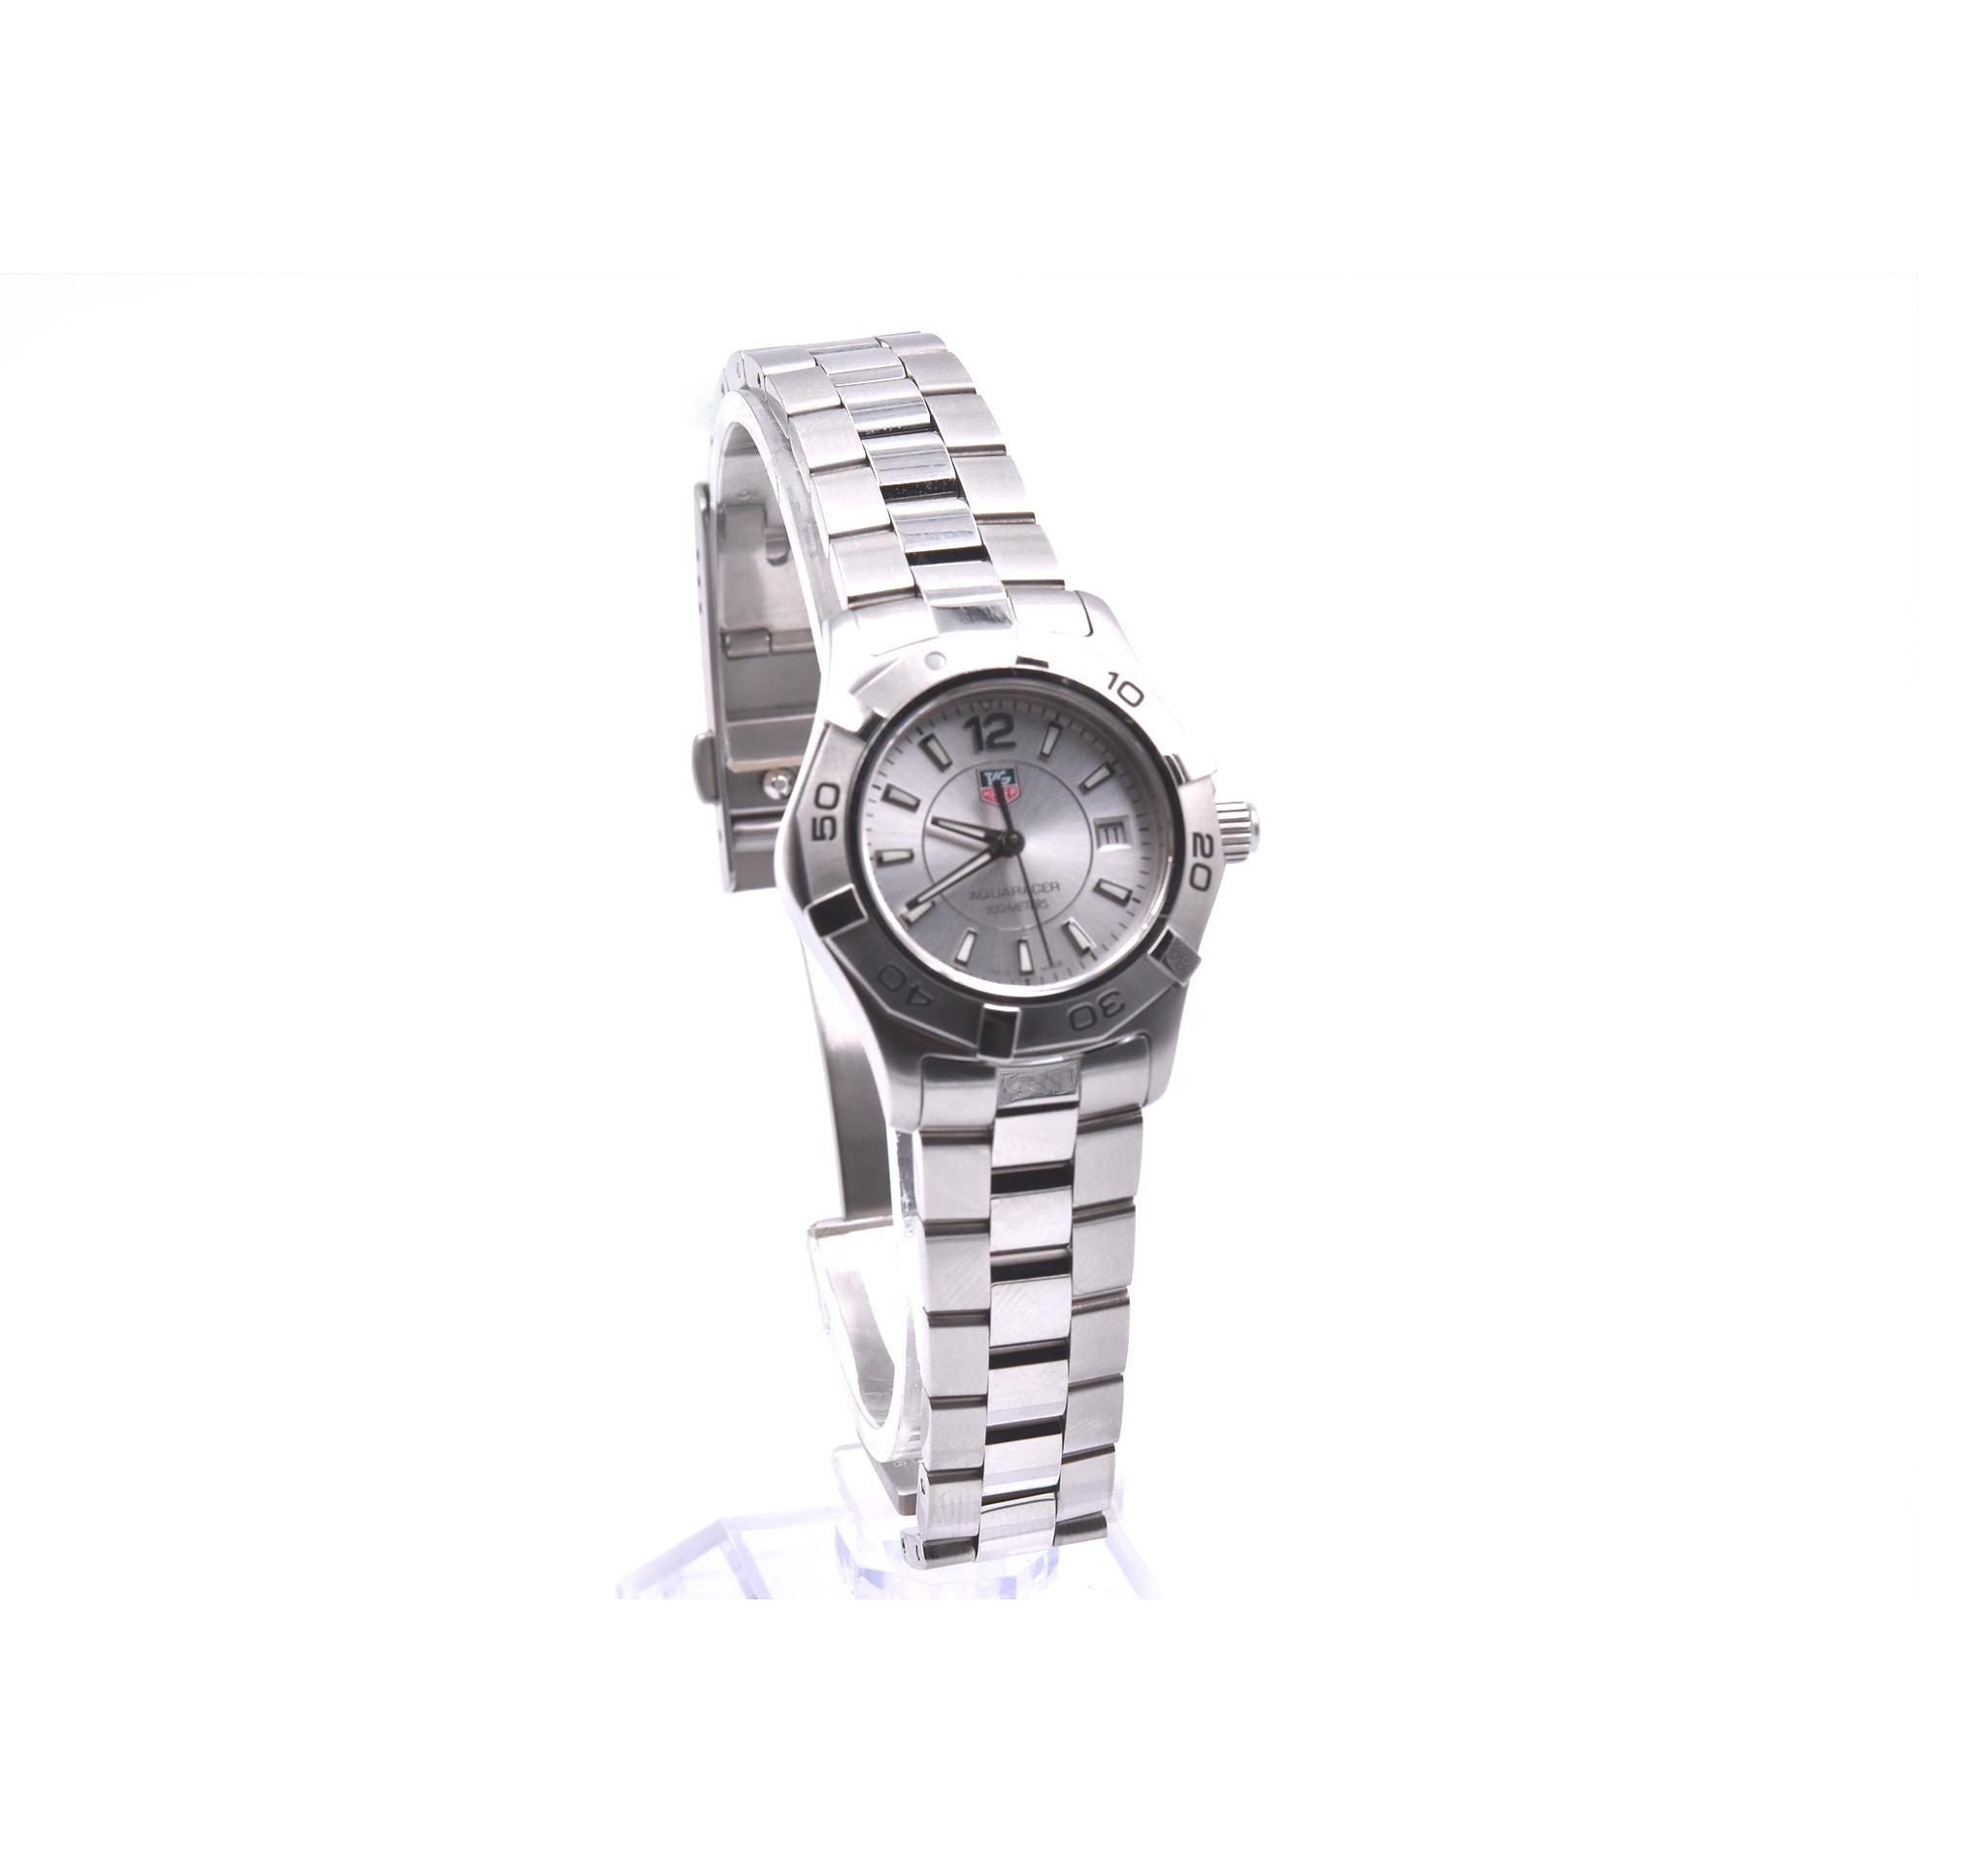 Movement: quartz
Function: hours, minutes, date
Case: 27mm stainless steel case, sapphire crystal, rotating bezel 
Band: stainless steel bracelet with Tag Heuer deployment clasp 
Dial: silver dial, luminous silver hands and silver stick hour